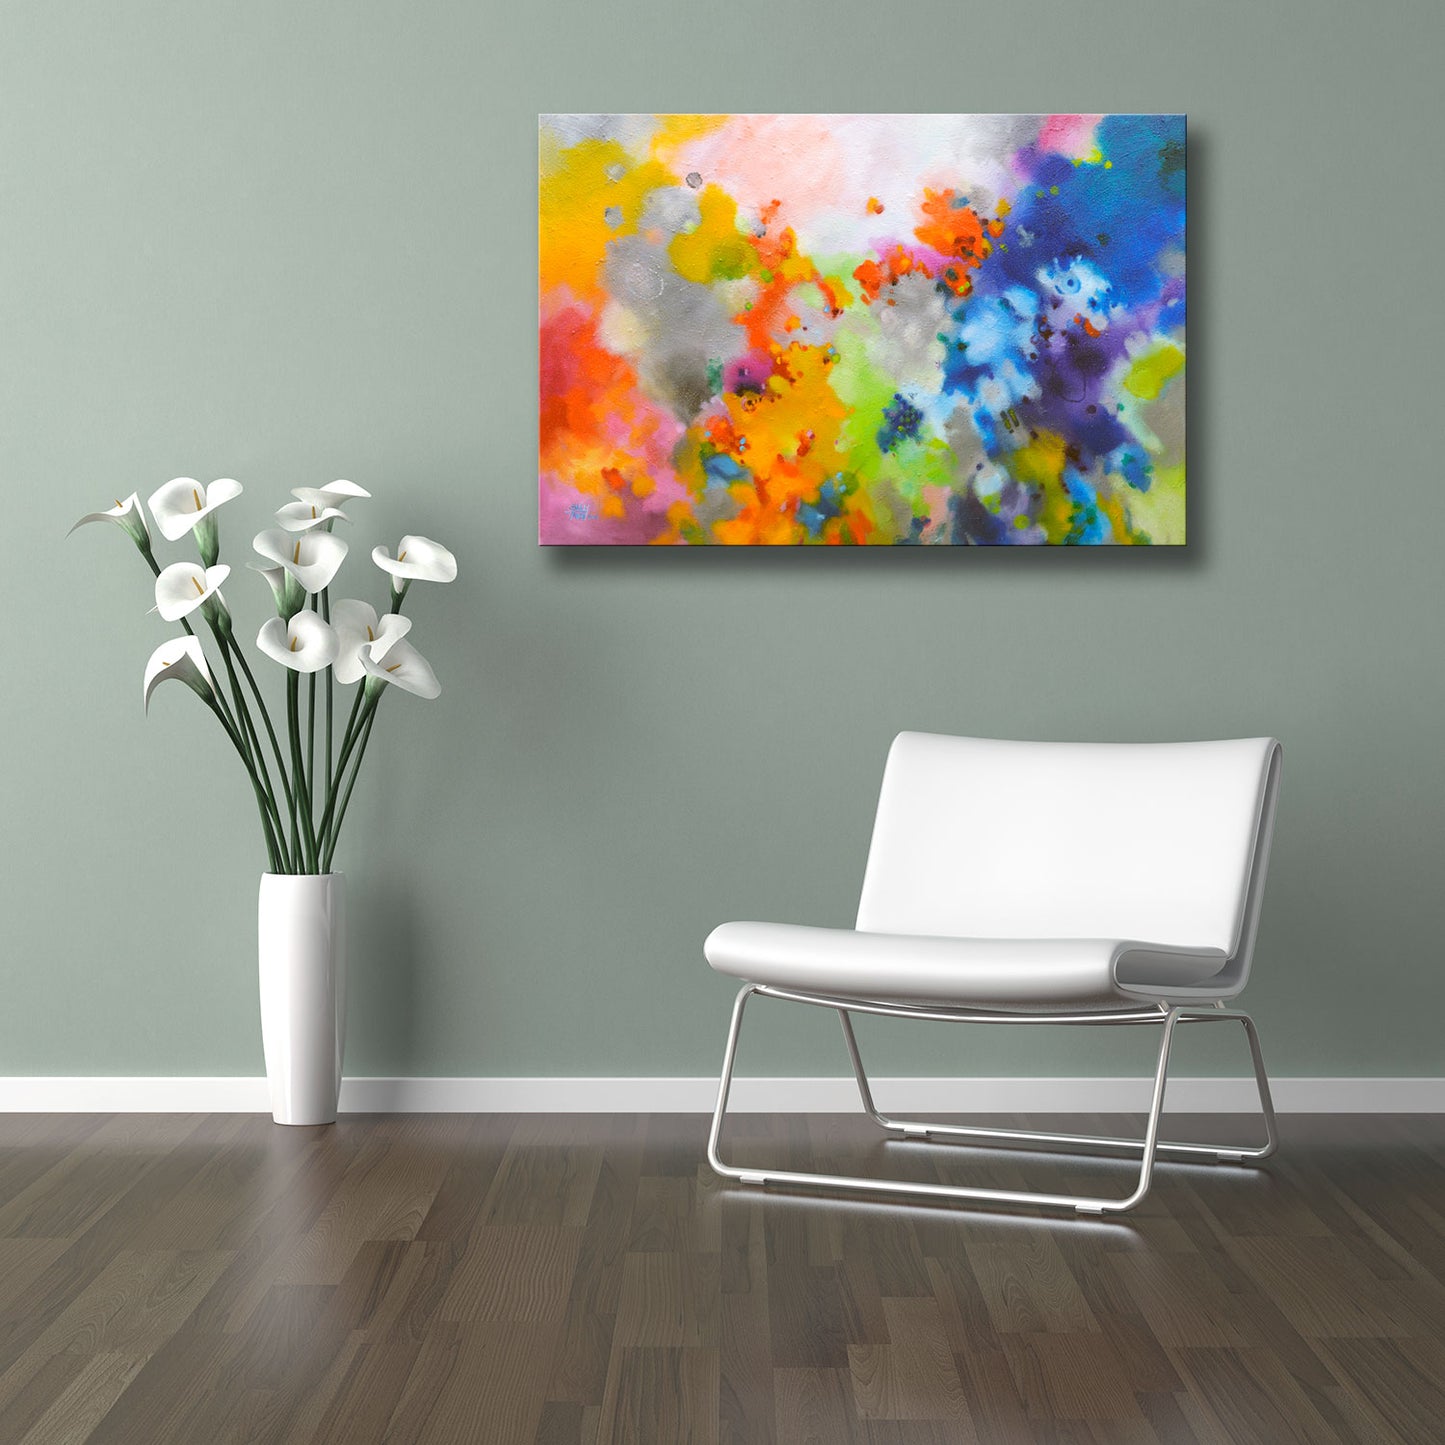 Point of View by Sally Trace, giclee prints on stretched canvas from my original textured abstract painting.